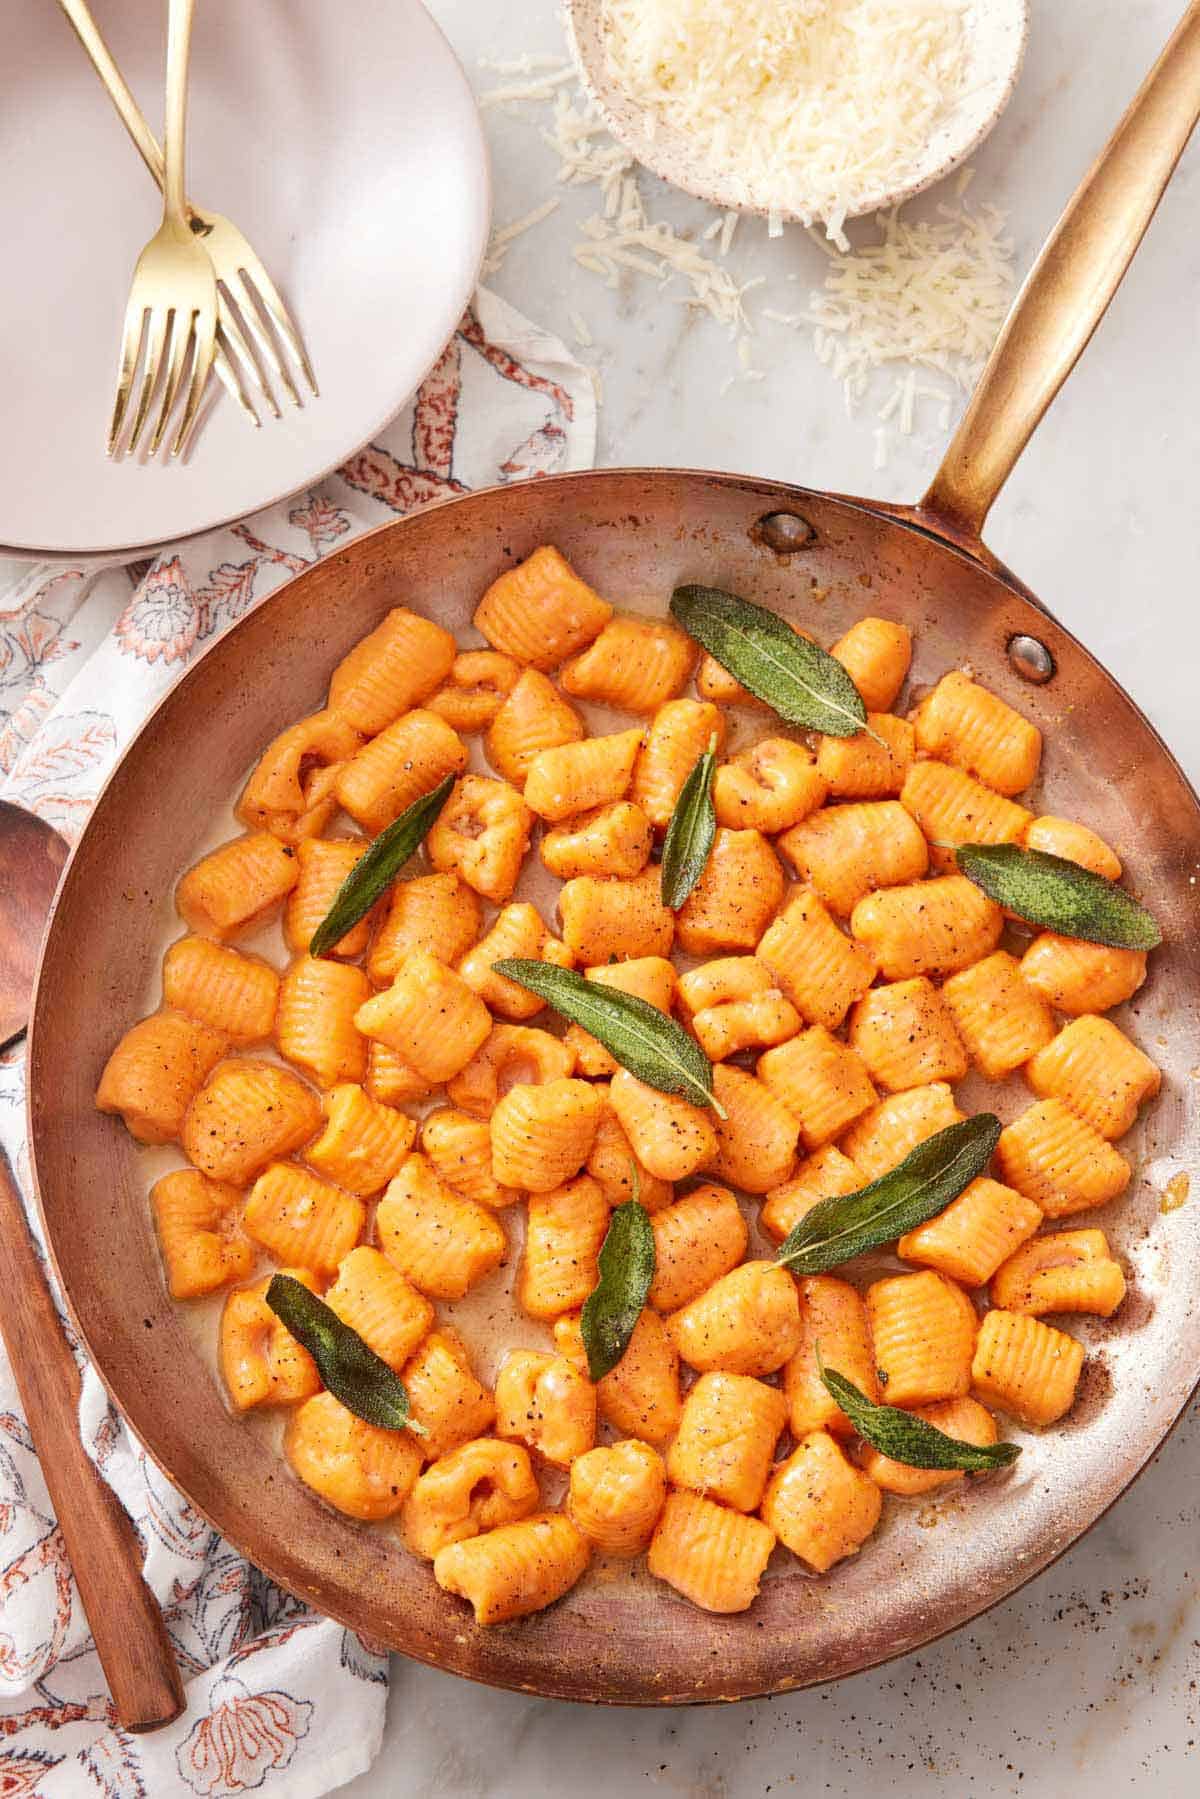 Overhead view of a skillet of sweet potato gnocchi with sage. A bowl of parmesan on the side along with plates and forks.